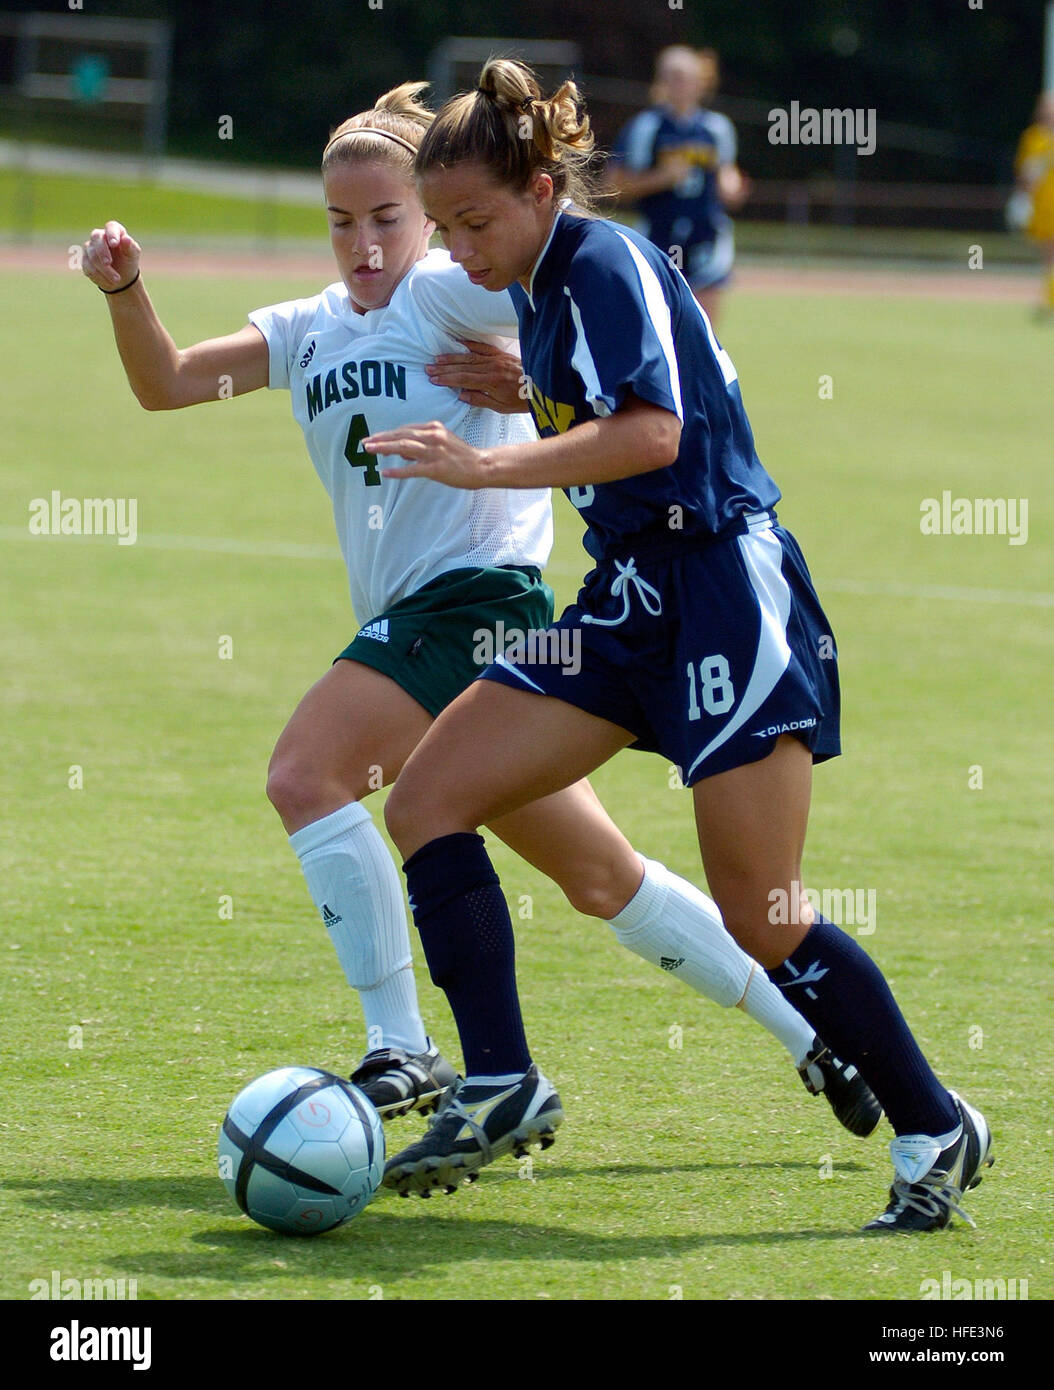 040829-N-9694M-002 Fairfax, Va. (Aug. 29, 2004) - U.S. Naval Academy Midshipman 3rd Class Meggie Curran races to keep the ball away from George Mason University's Danielle McDonald during a regular season soccer match. Sophomore forward Meggie Curran, from Silver Spring, Md., put the Mids on top in the 14th minute when rookie Kari Weniger, St. Petersburg, Fla., crossed the ball to Curran who fired in the shot to the lower left side of the net. Two days after playing the eighth-ranked team in the country, Connecticut, the Navy women's soccer team (0-1-1) battled George Mason (1-0-1) to a 1-1 ti Stock Photo